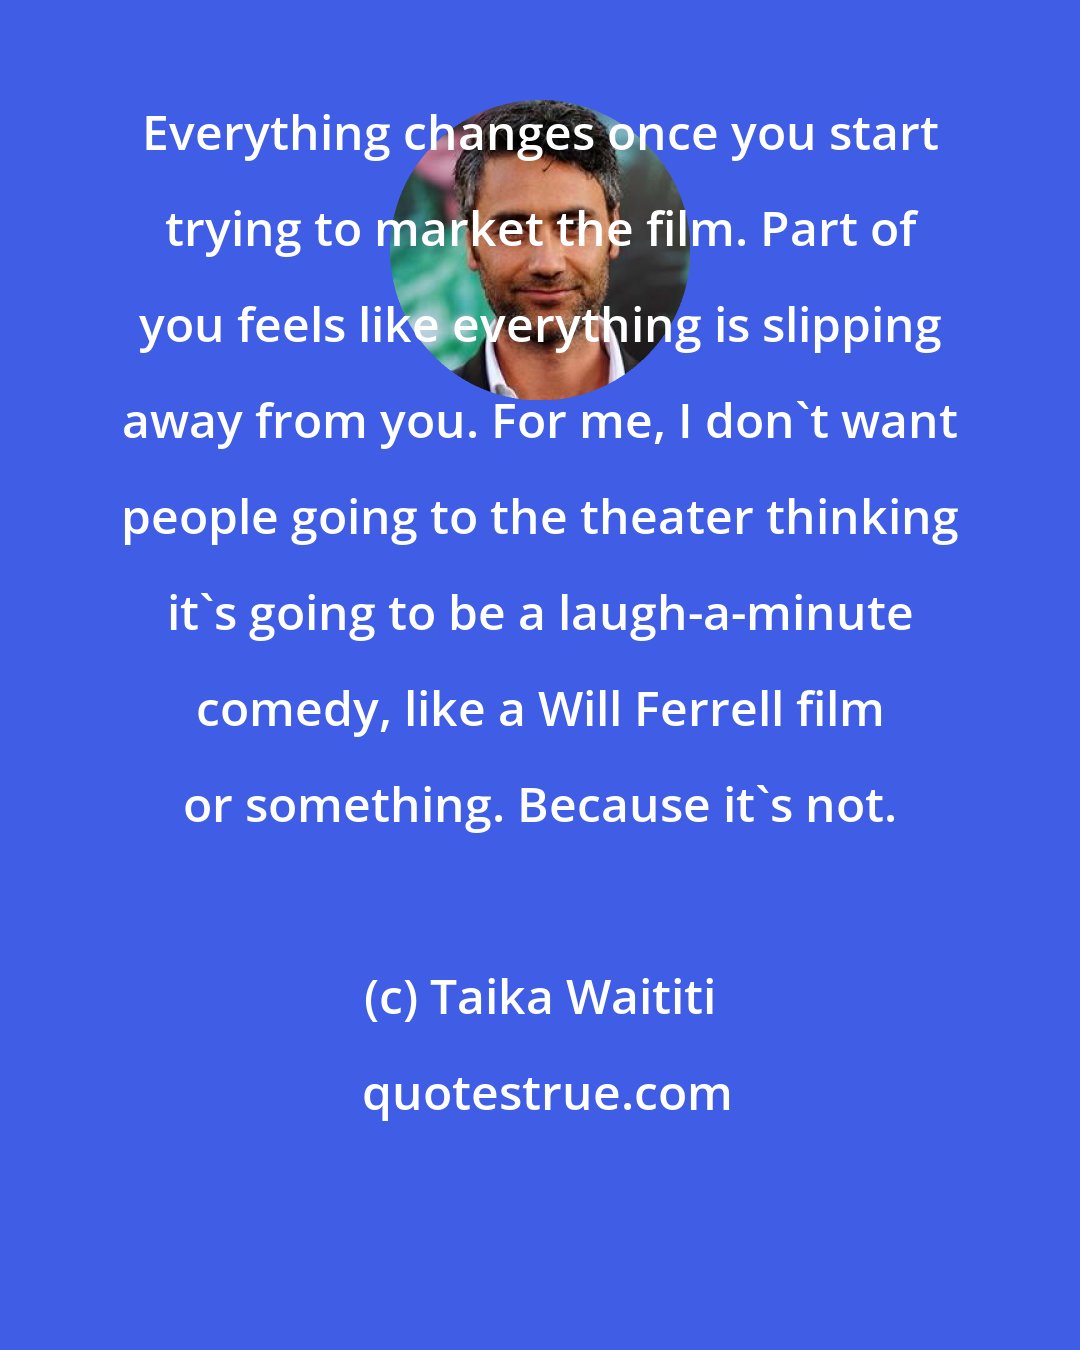 Taika Waititi: Everything changes once you start trying to market the film. Part of you feels like everything is slipping away from you. For me, I don't want people going to the theater thinking it's going to be a laugh-a-minute comedy, like a Will Ferrell film or something. Because it's not.